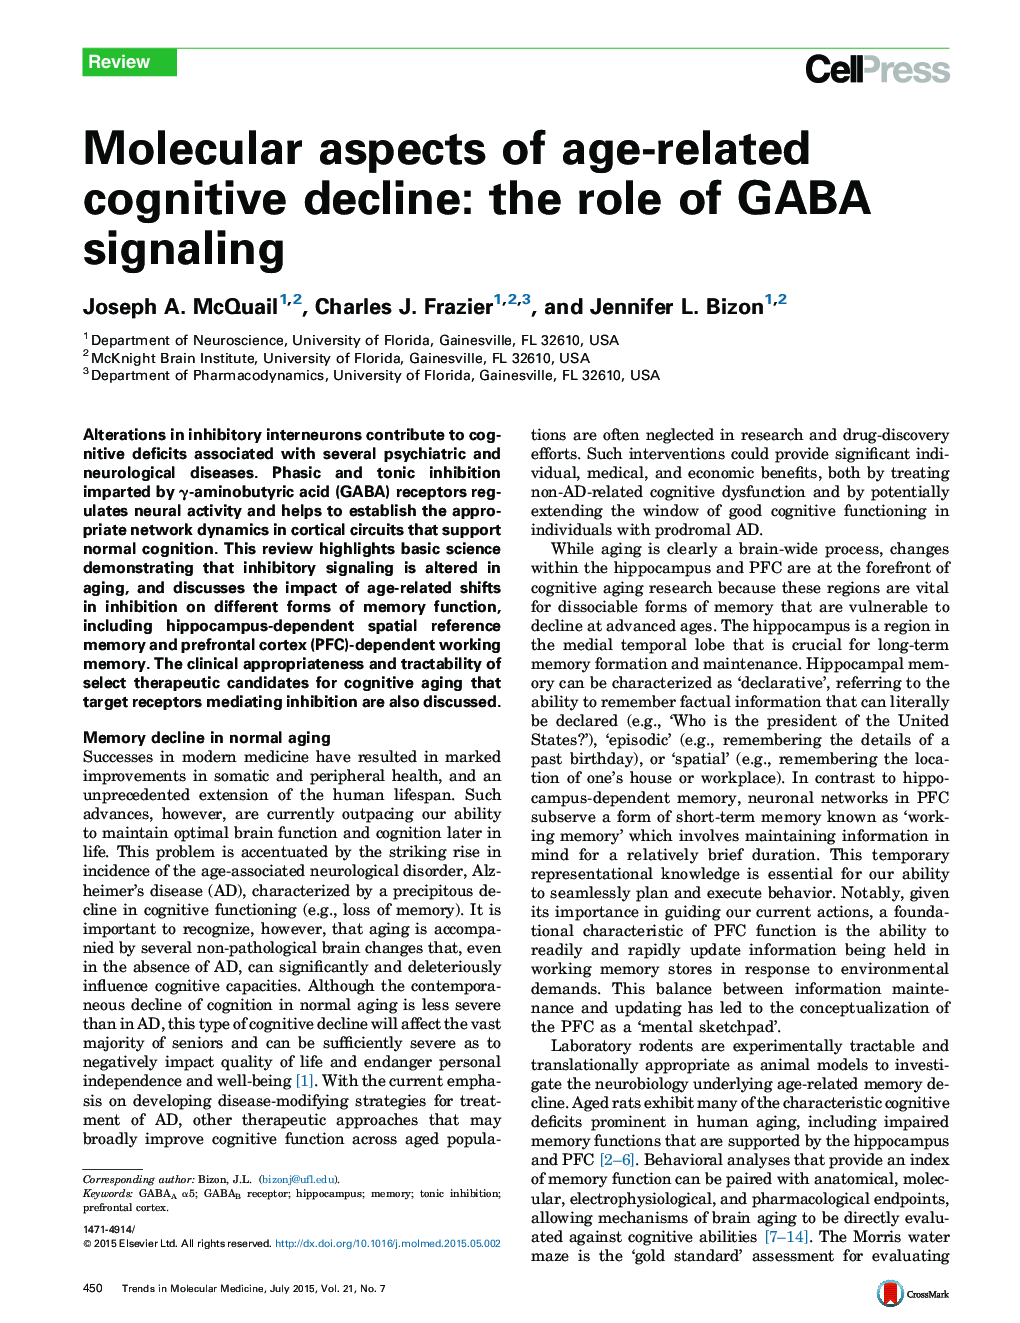 Molecular aspects of age-related cognitive decline: the role of GABA signaling